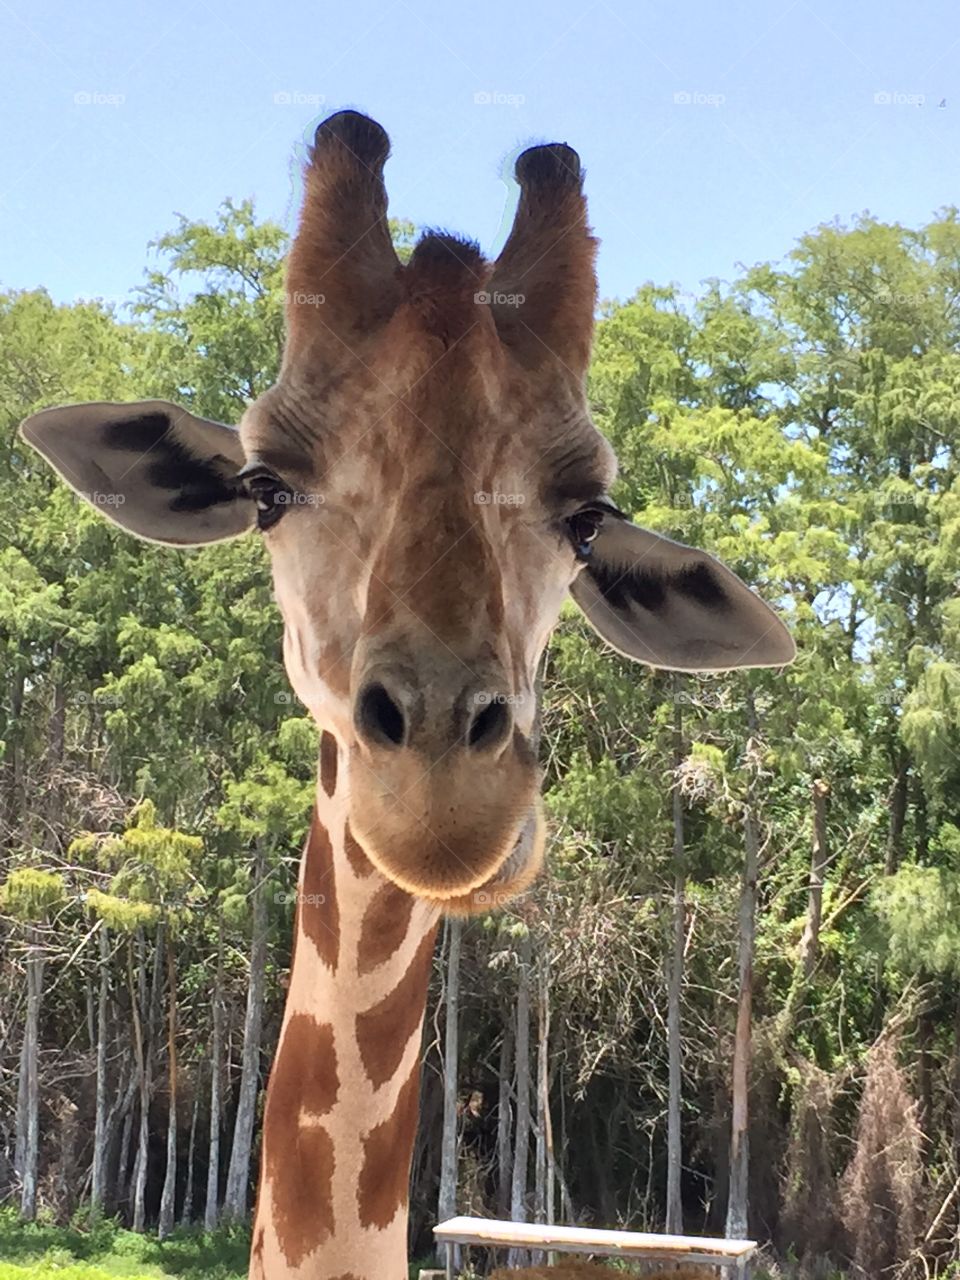 Juvenile Giraffe chewing outside while looking at the camera